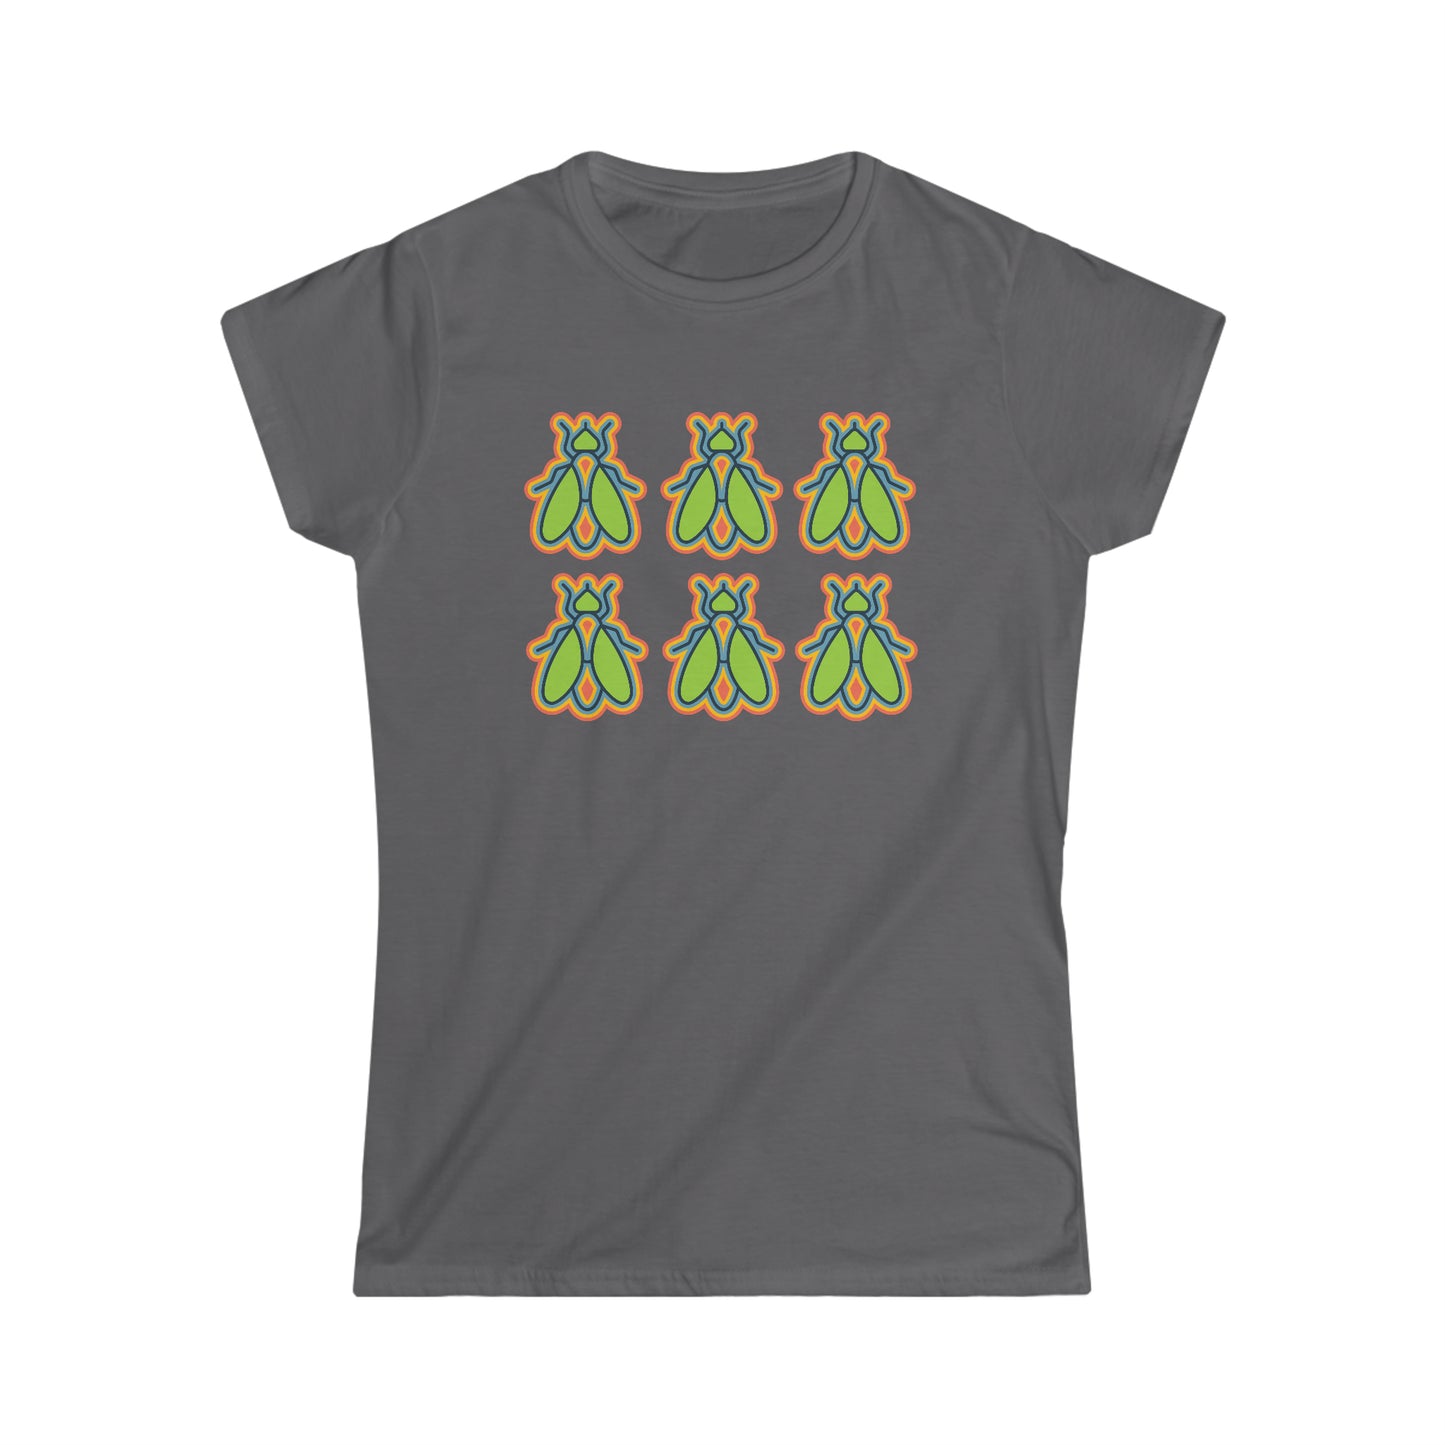 Women's Super Fly Softstyle Tee